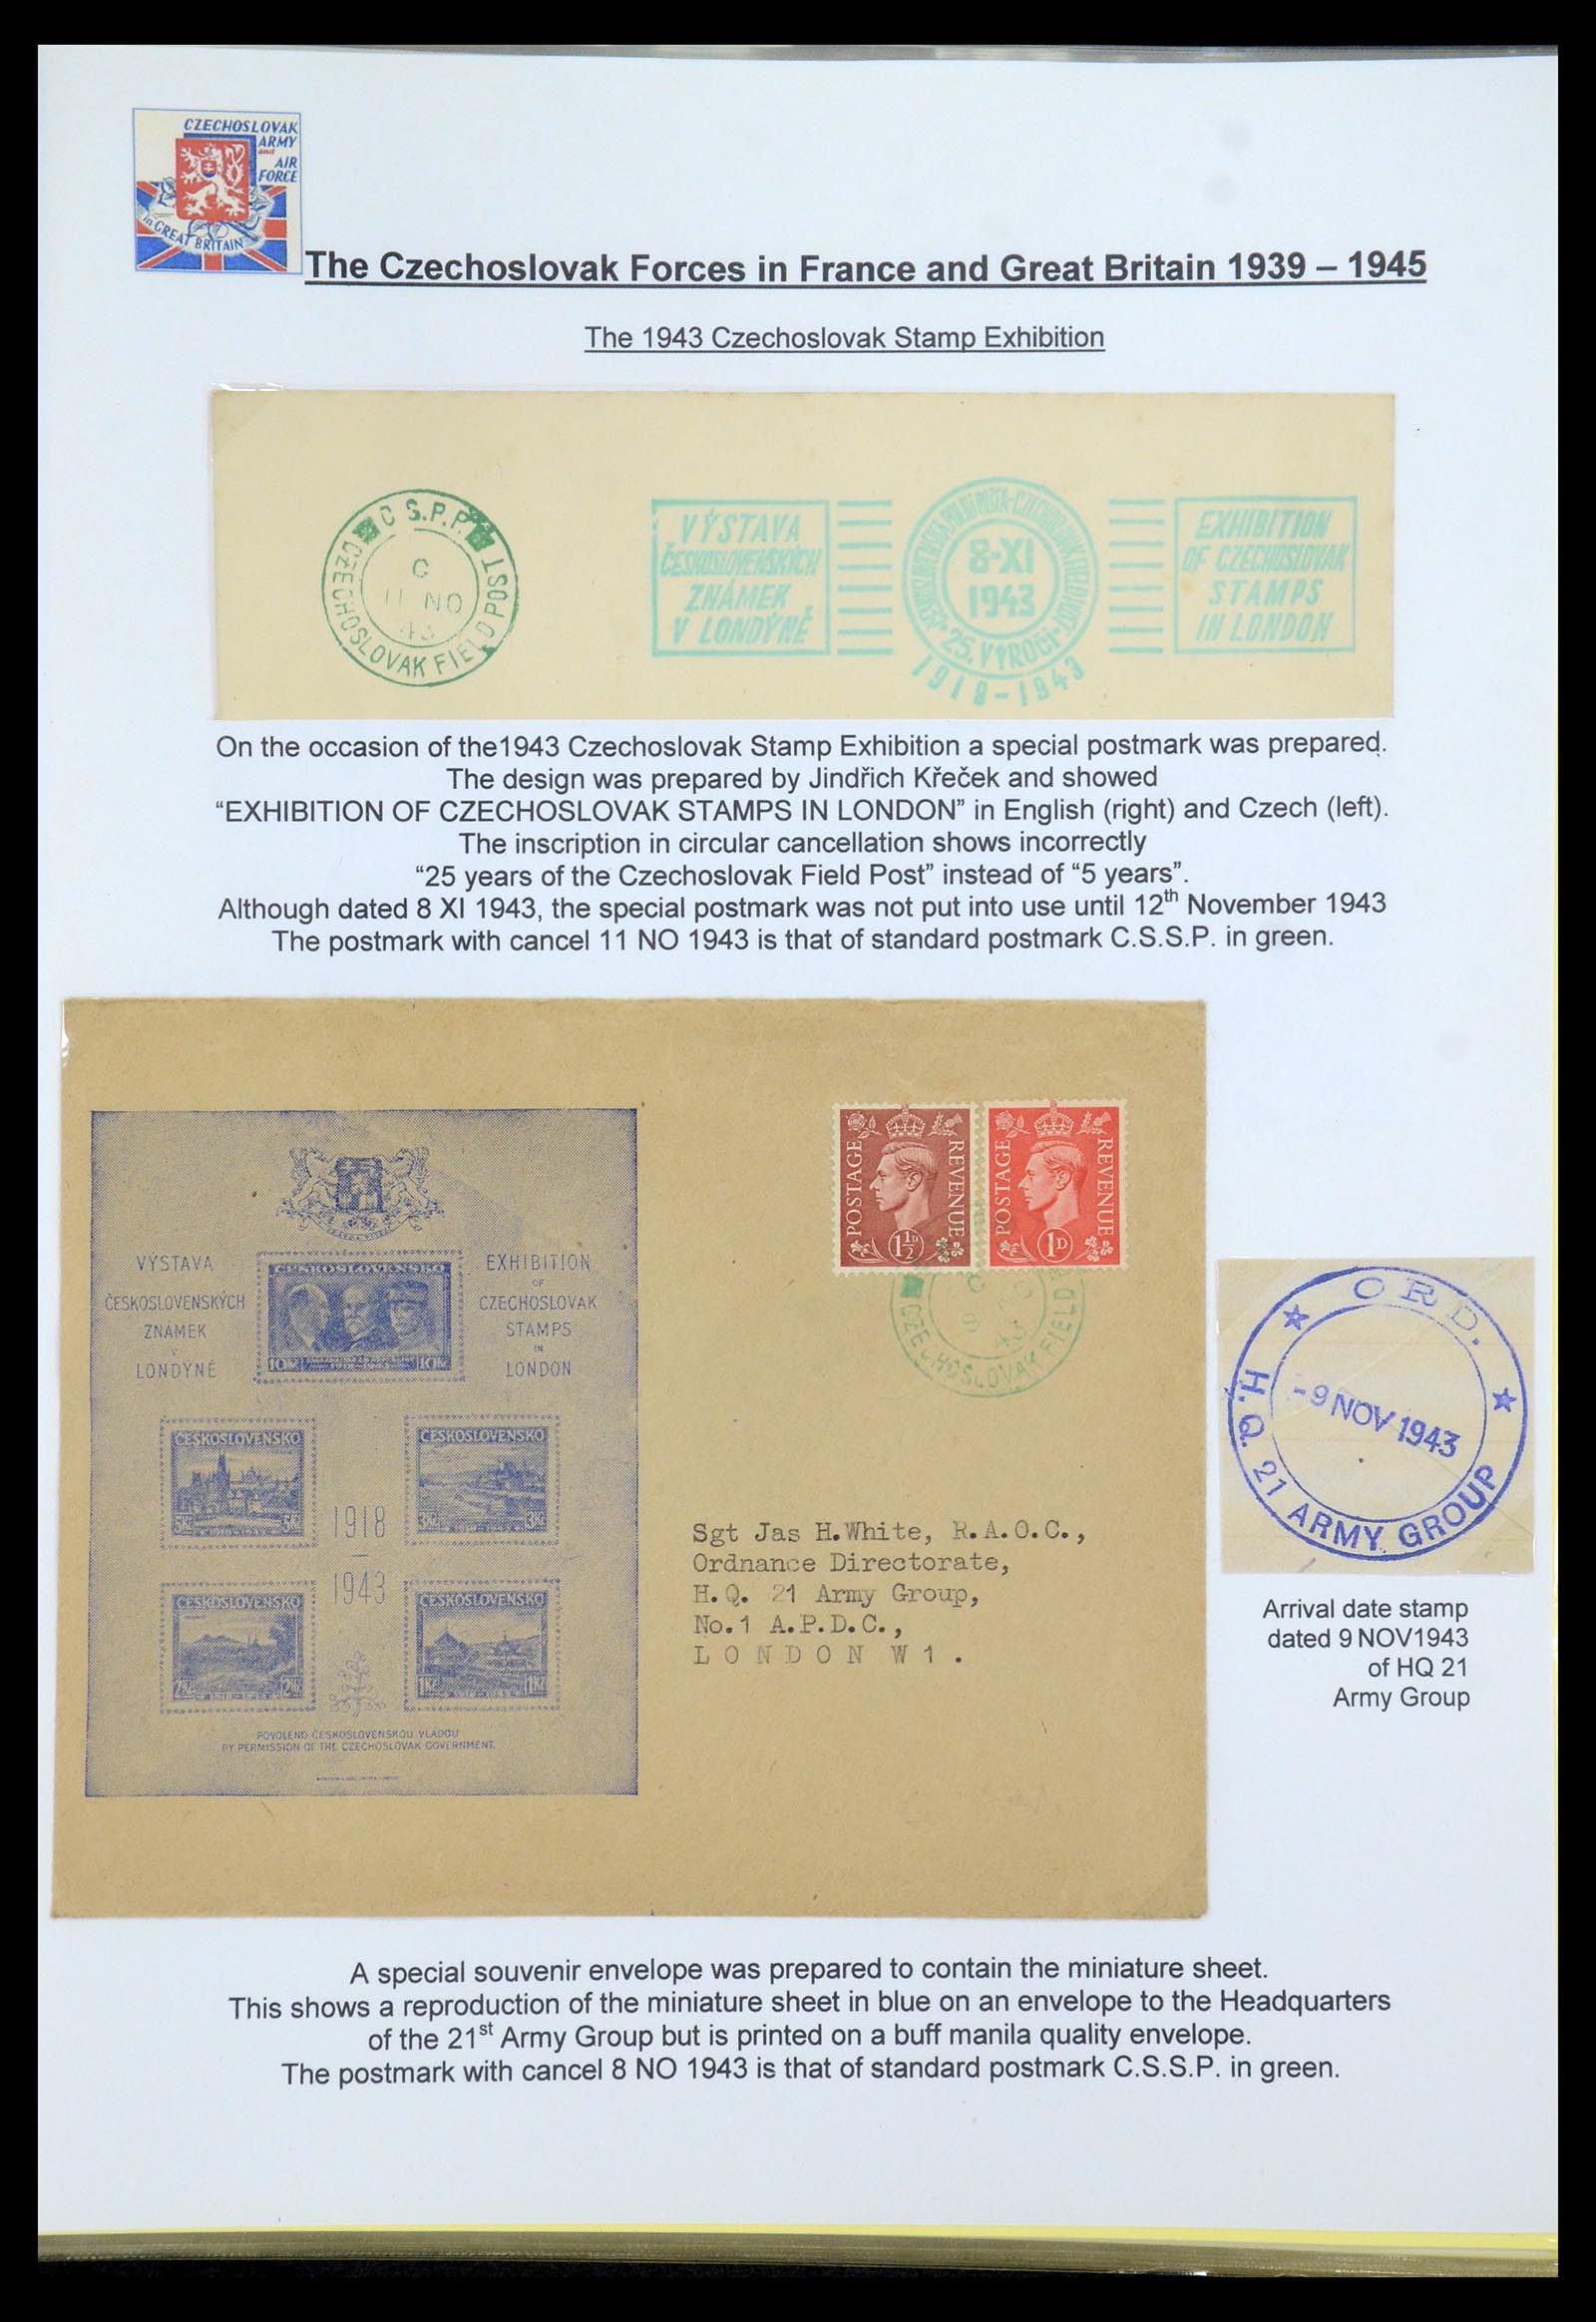 35574 084 - Stamp Collection 35574 Czechoslovak forces in France and Great Britain 1